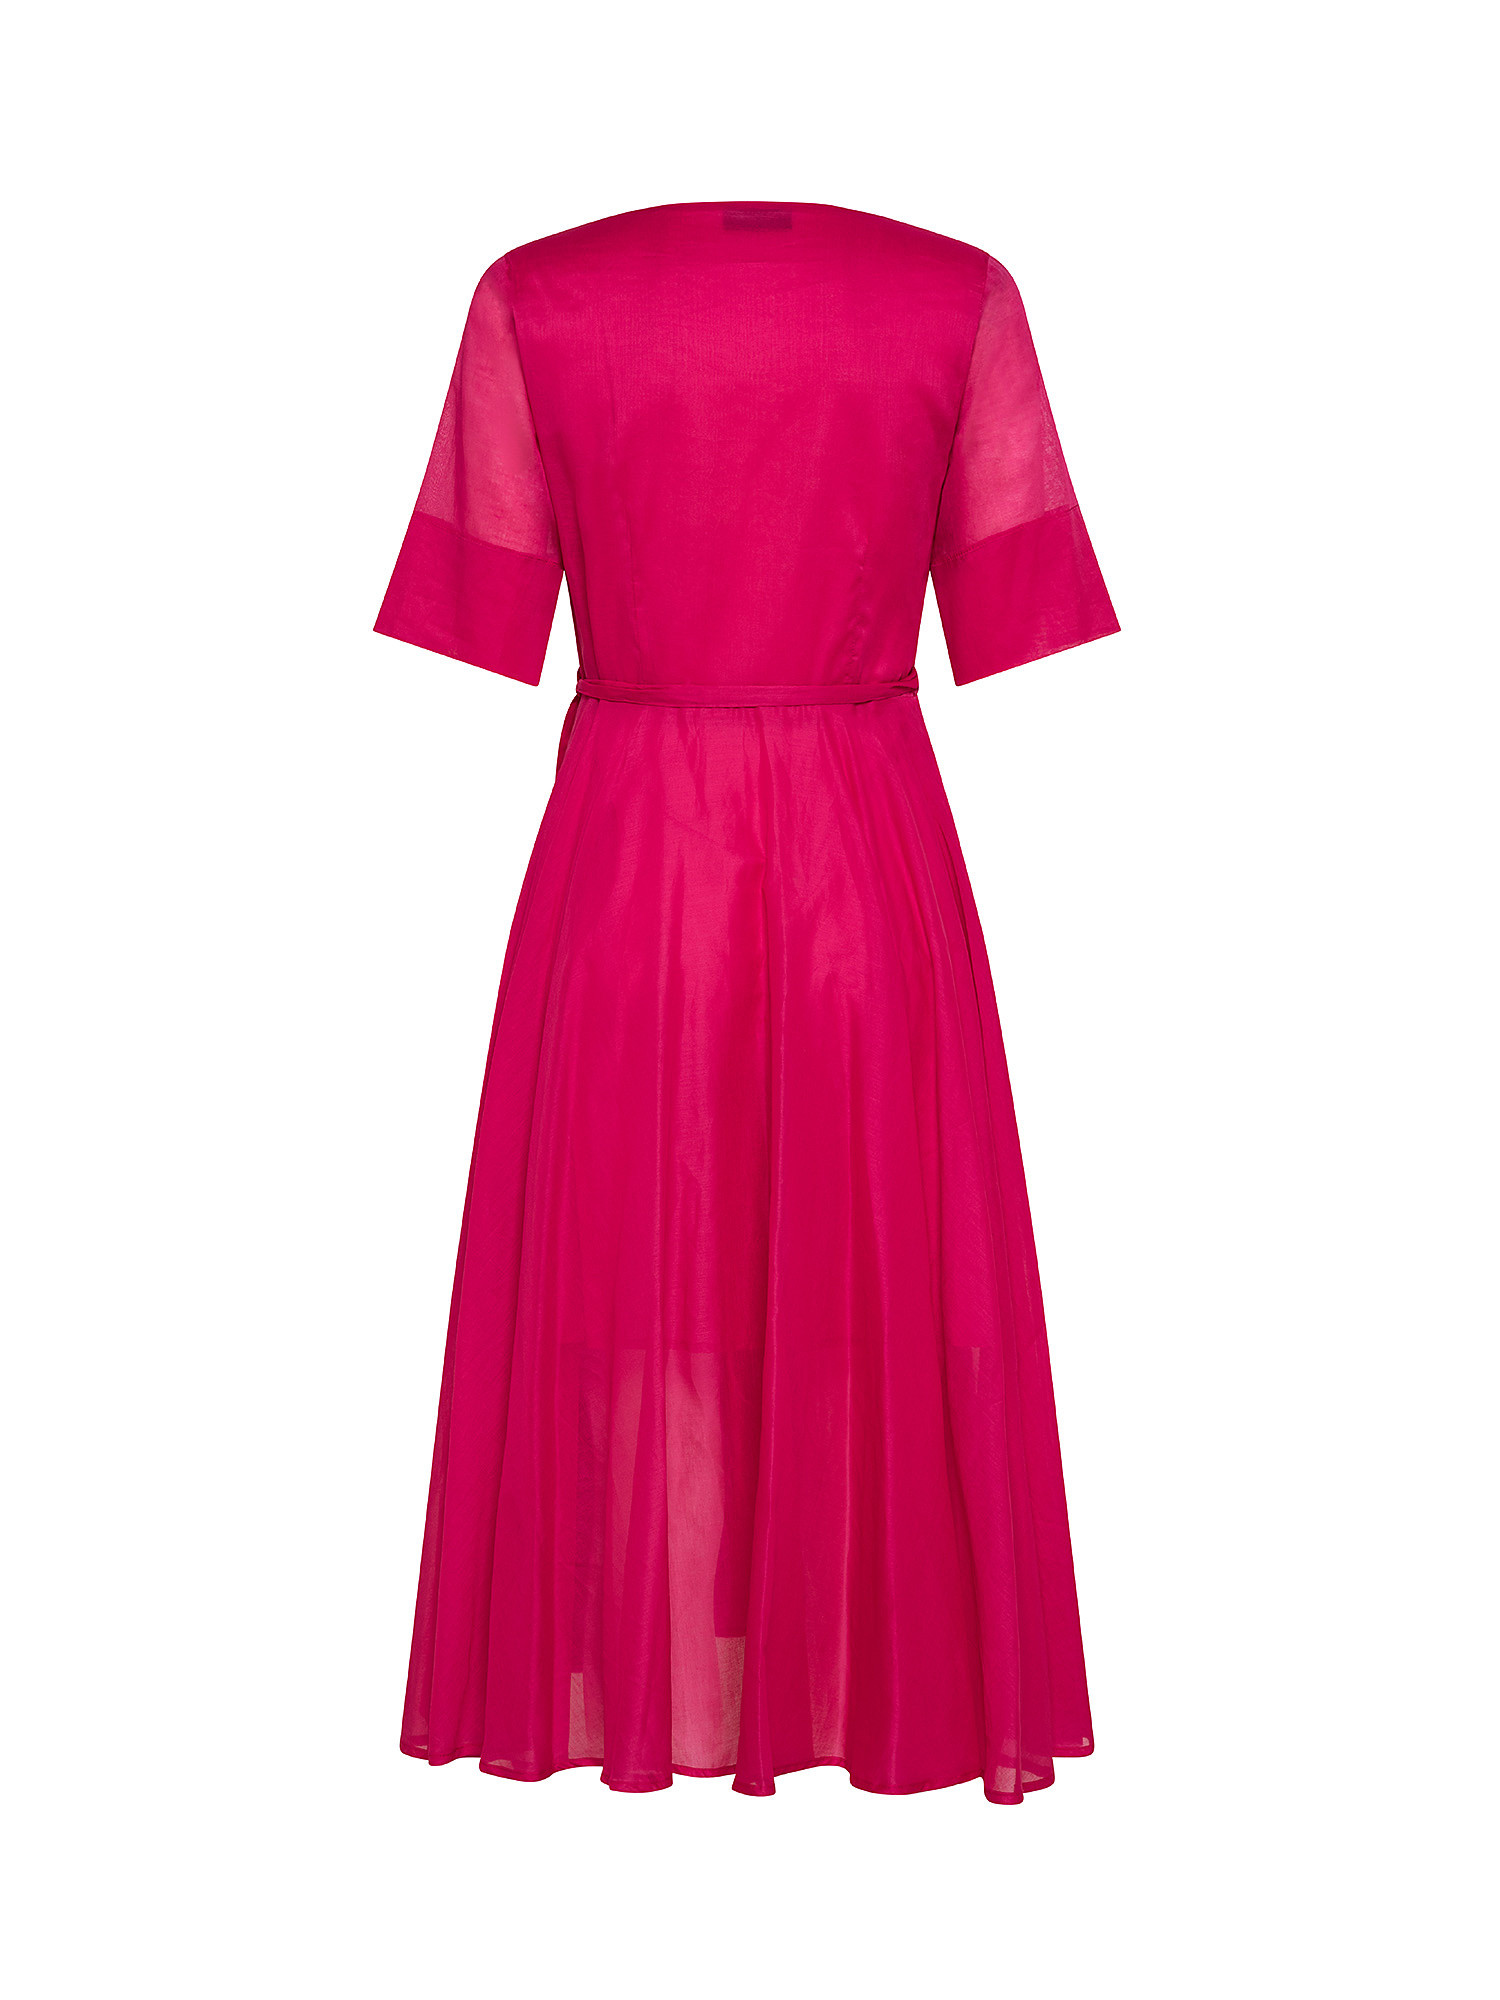 Voile dress, Pink Fuchsia, large image number 1